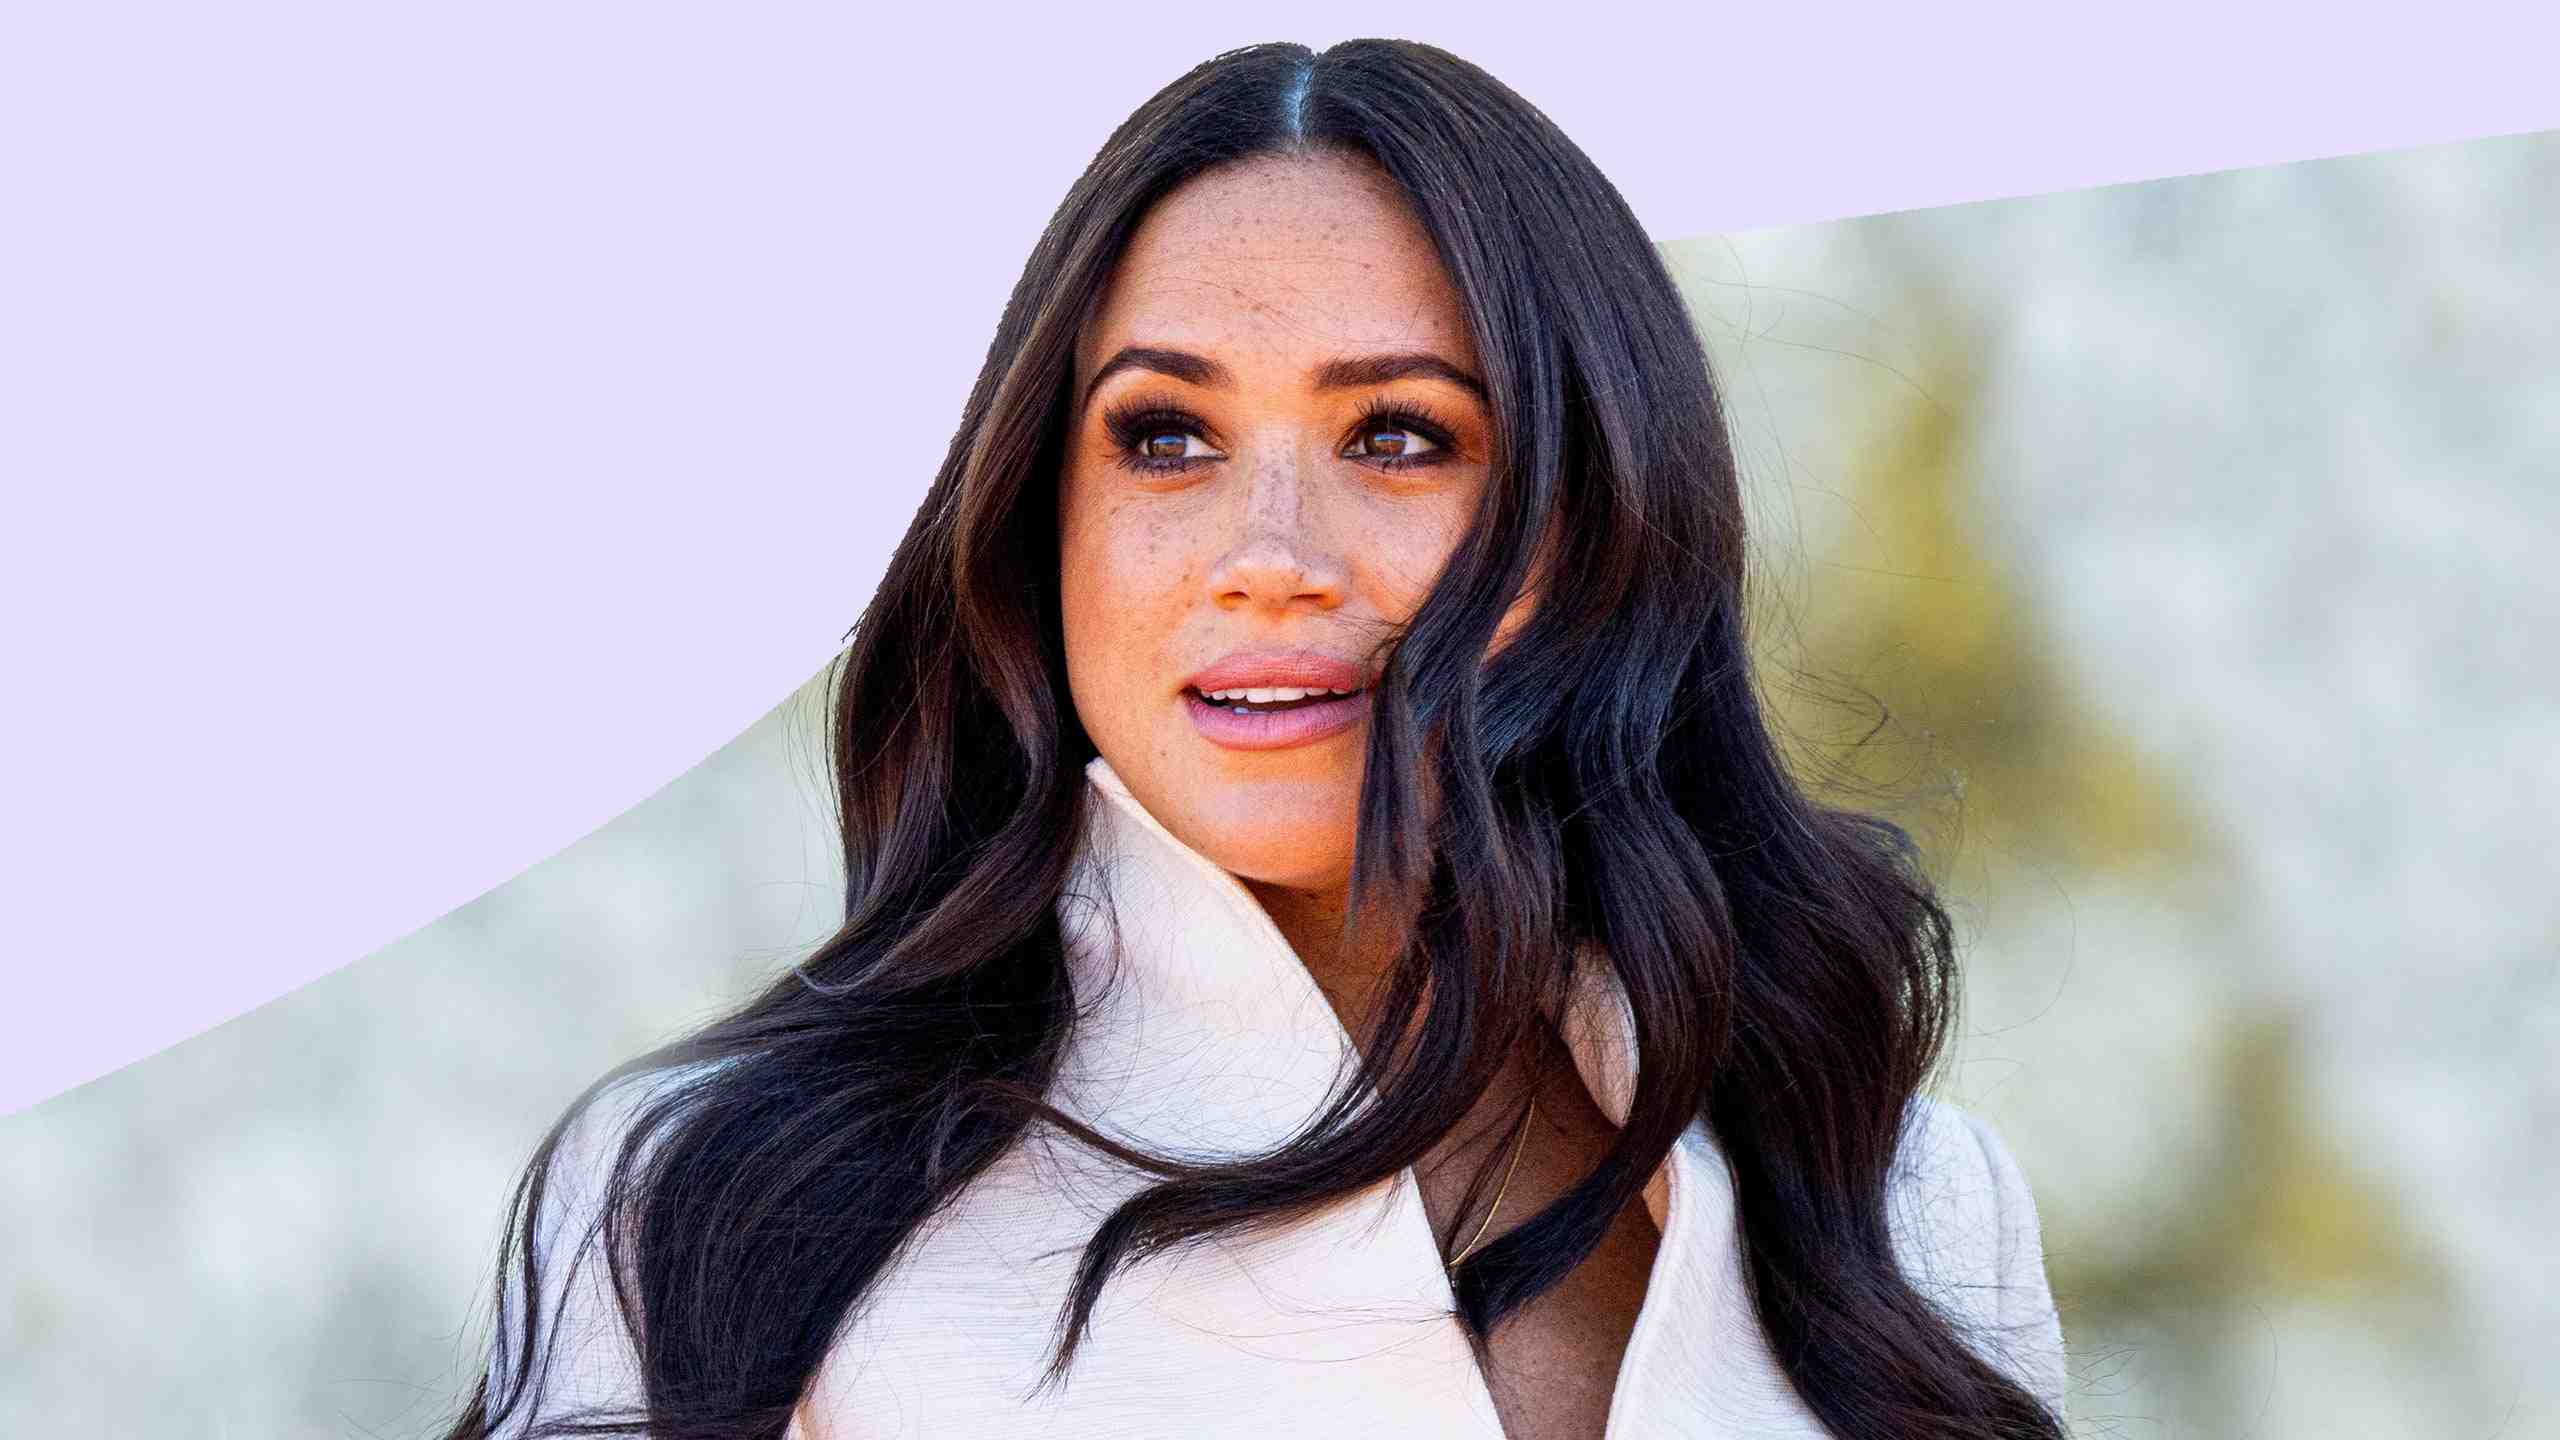 Journey through the Meghan Markle movies you wish you could forget! Brace yourself for a royal rewind into her less-than-regal roles in Hollywood's hall of shame. Dive in if you dare!